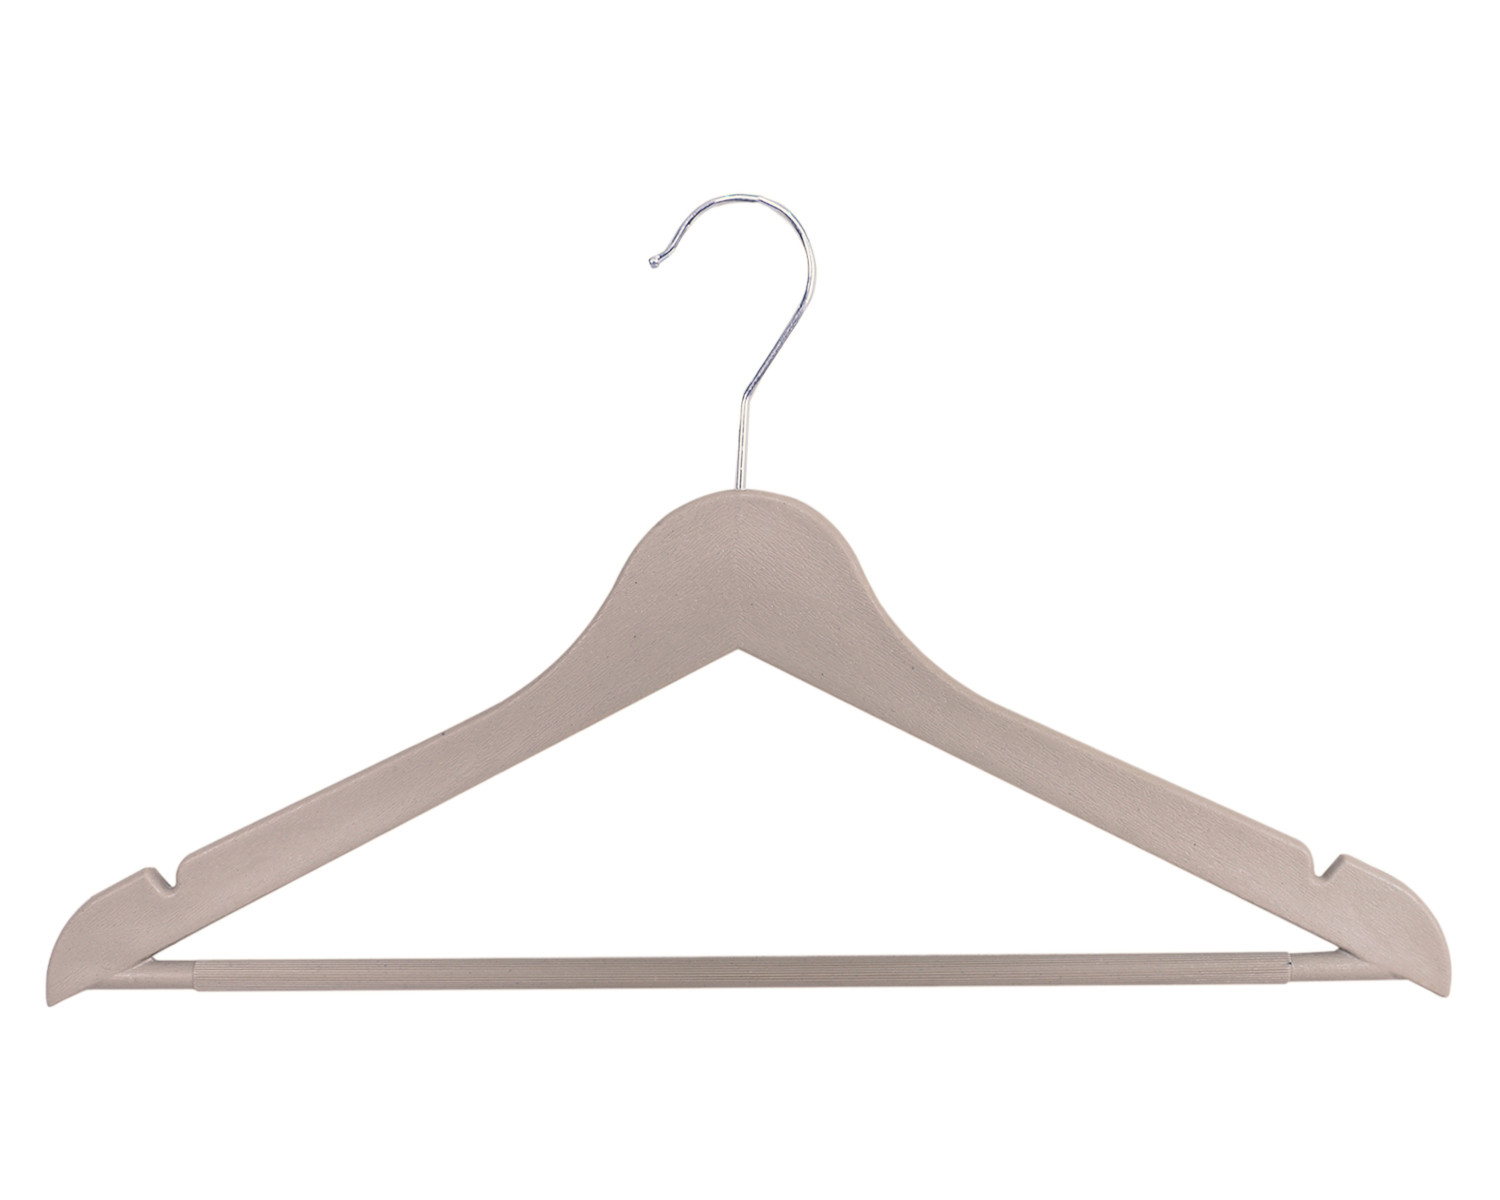 Kuber Industries Hanger|Durable & Lightweight Coat and Clothes Hangers|Notches Wardrobe Organization With 360 Degree Swivel Hook|(Cream)